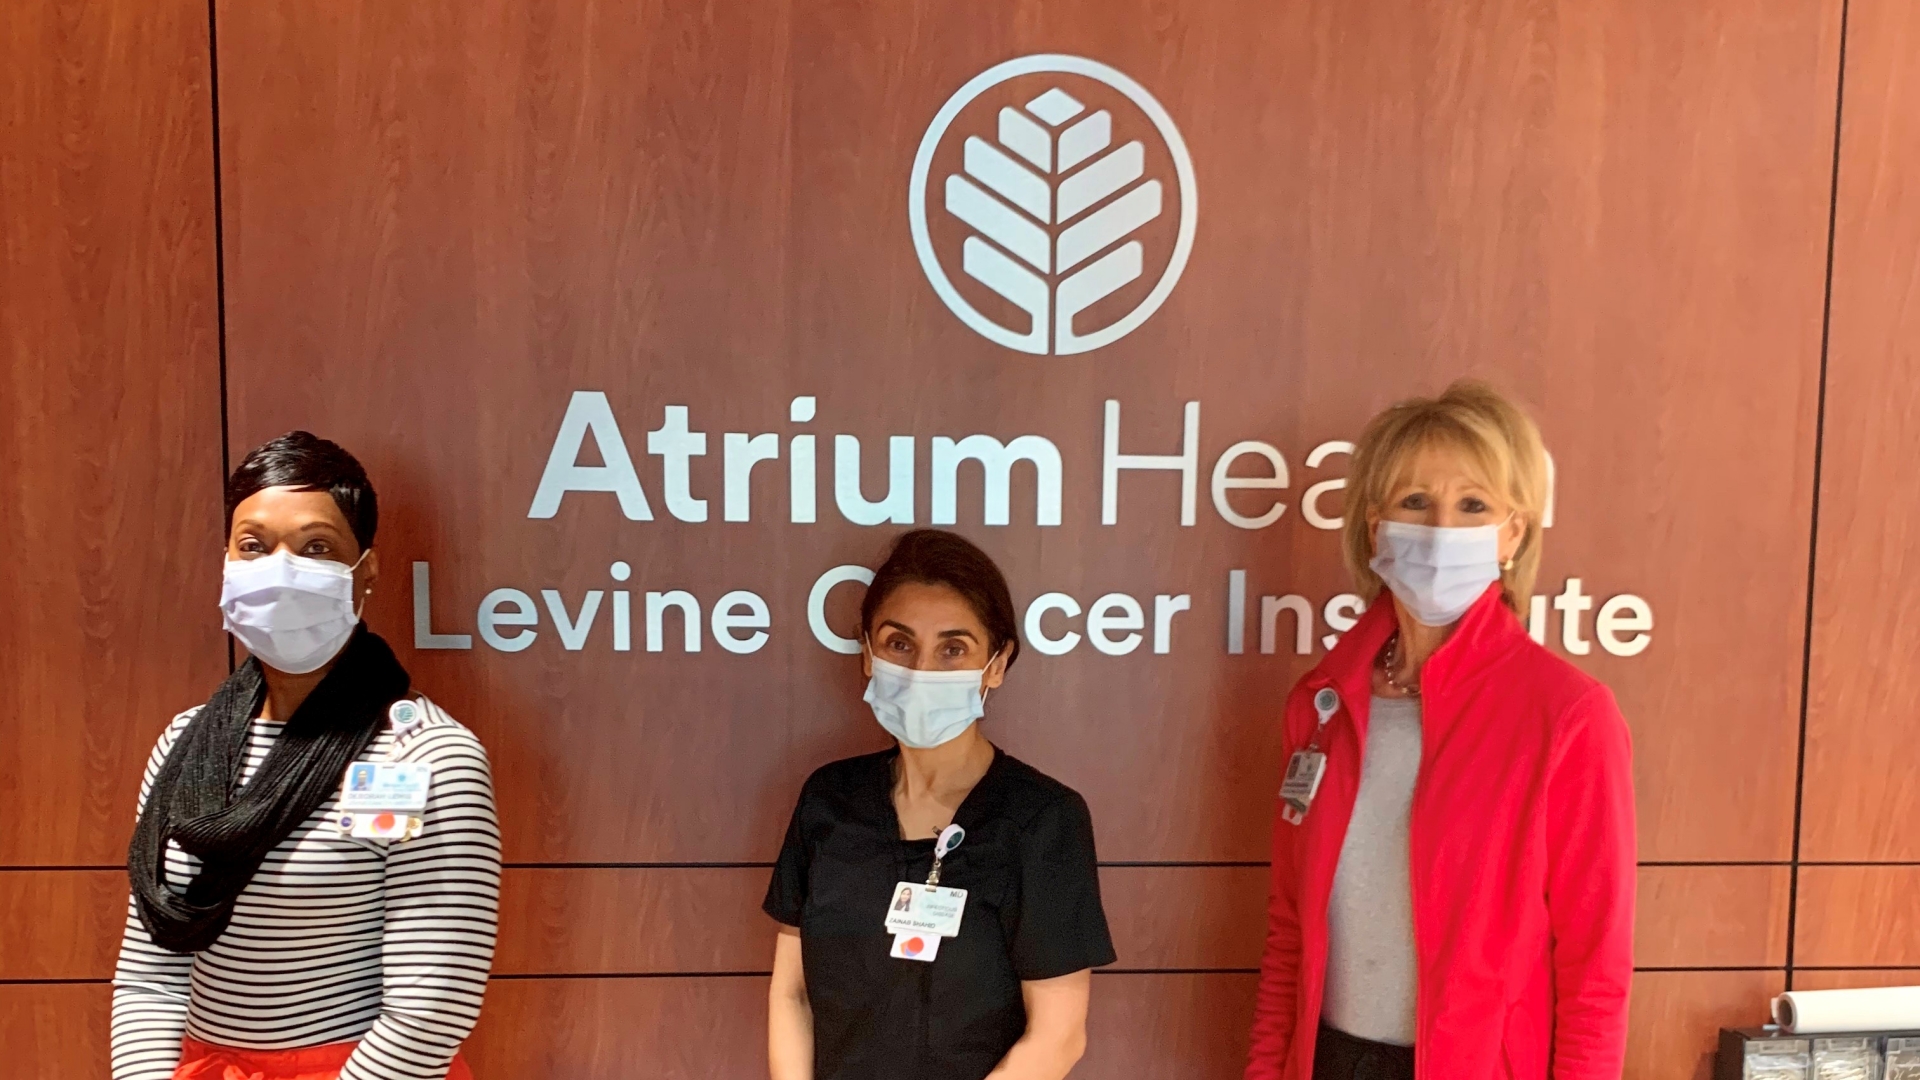 The first clinical trial for patients with coronavirus disease (COVID-19) is officially open at Atrium Health.